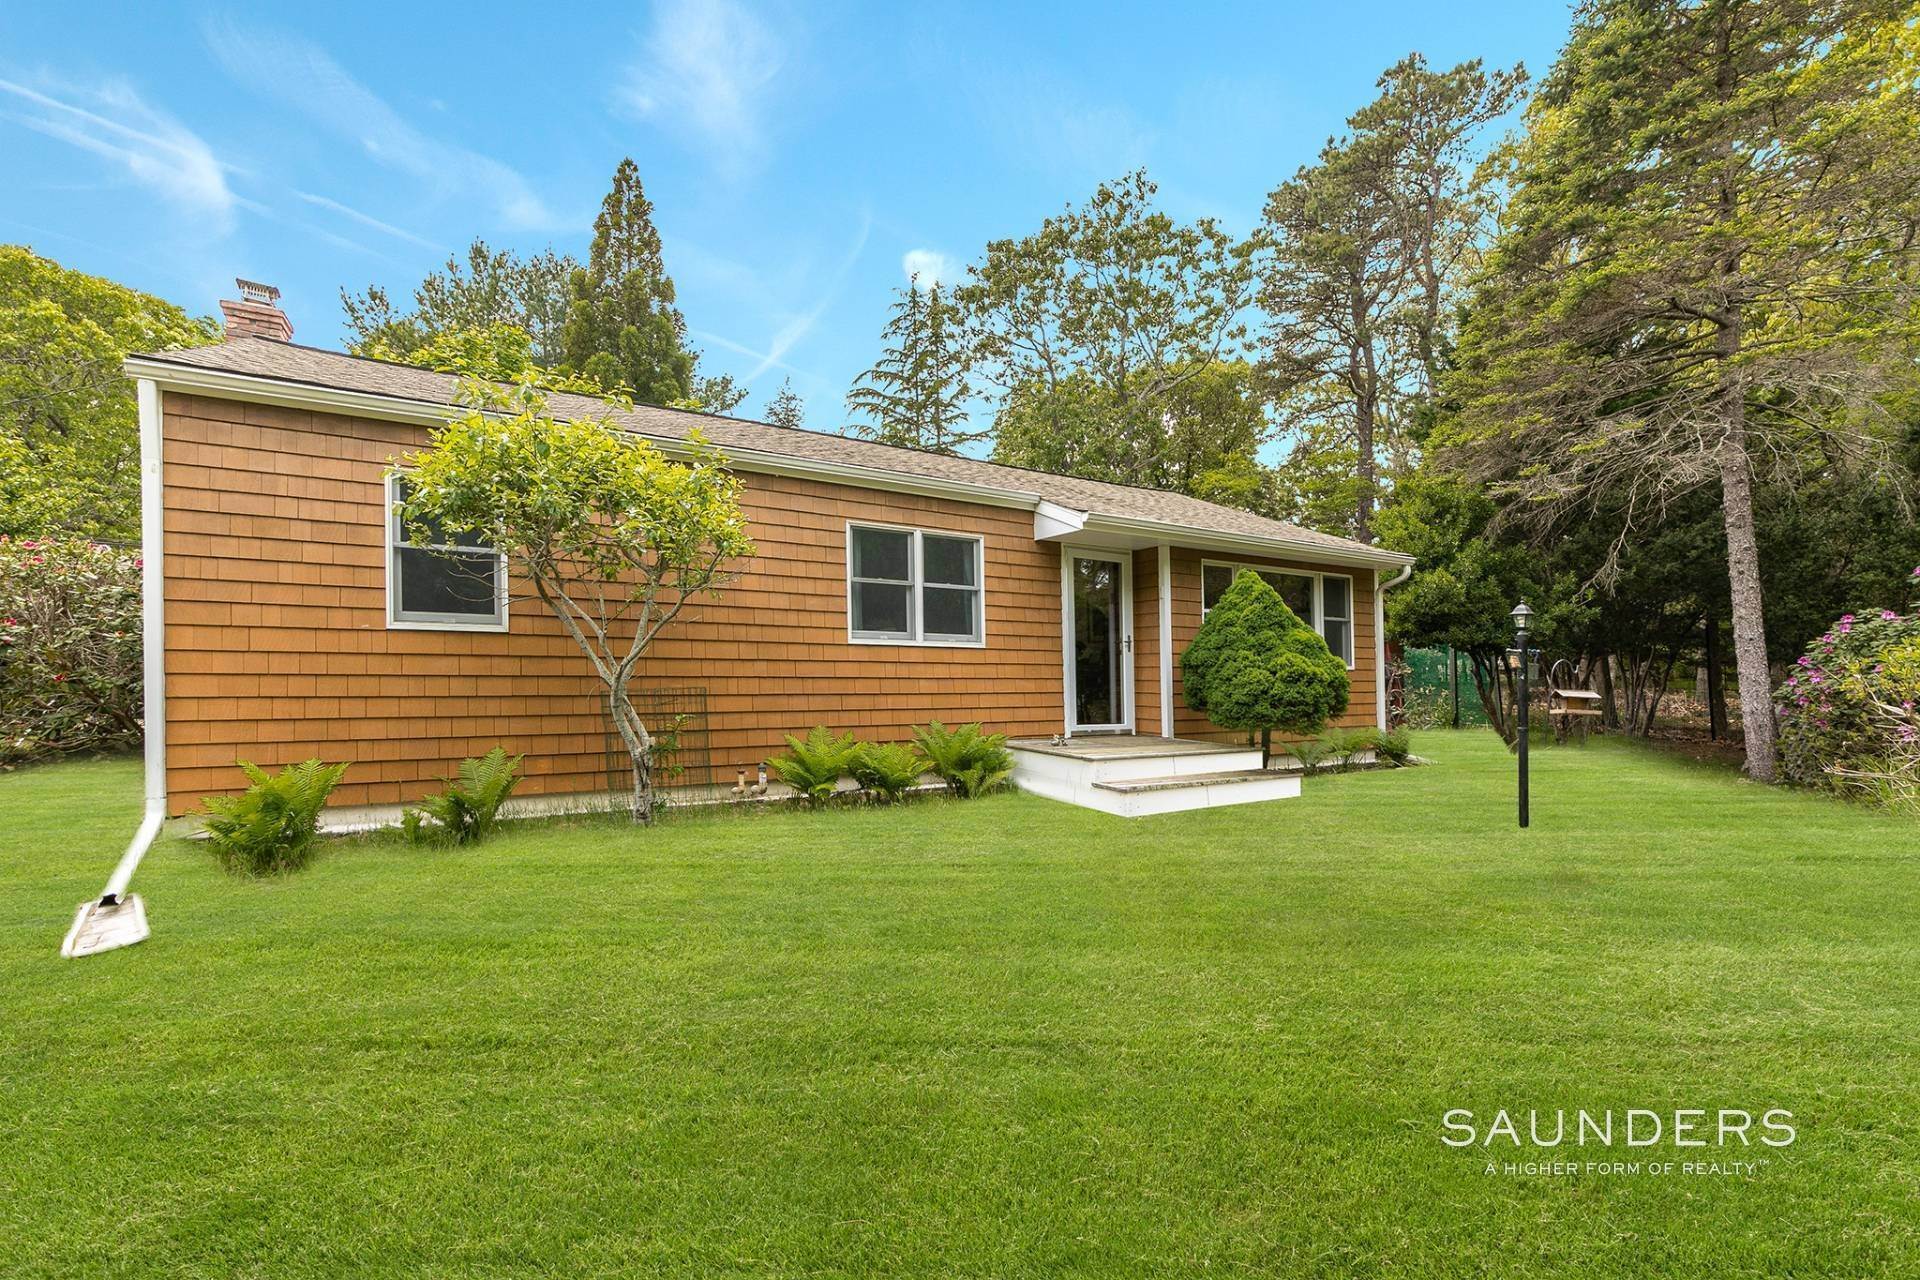 2. Single Family Homes for Sale at East Hampton Endless Opportunity On 1.1 Acres 93 Copeces Lane, East Hampton, NY 11937